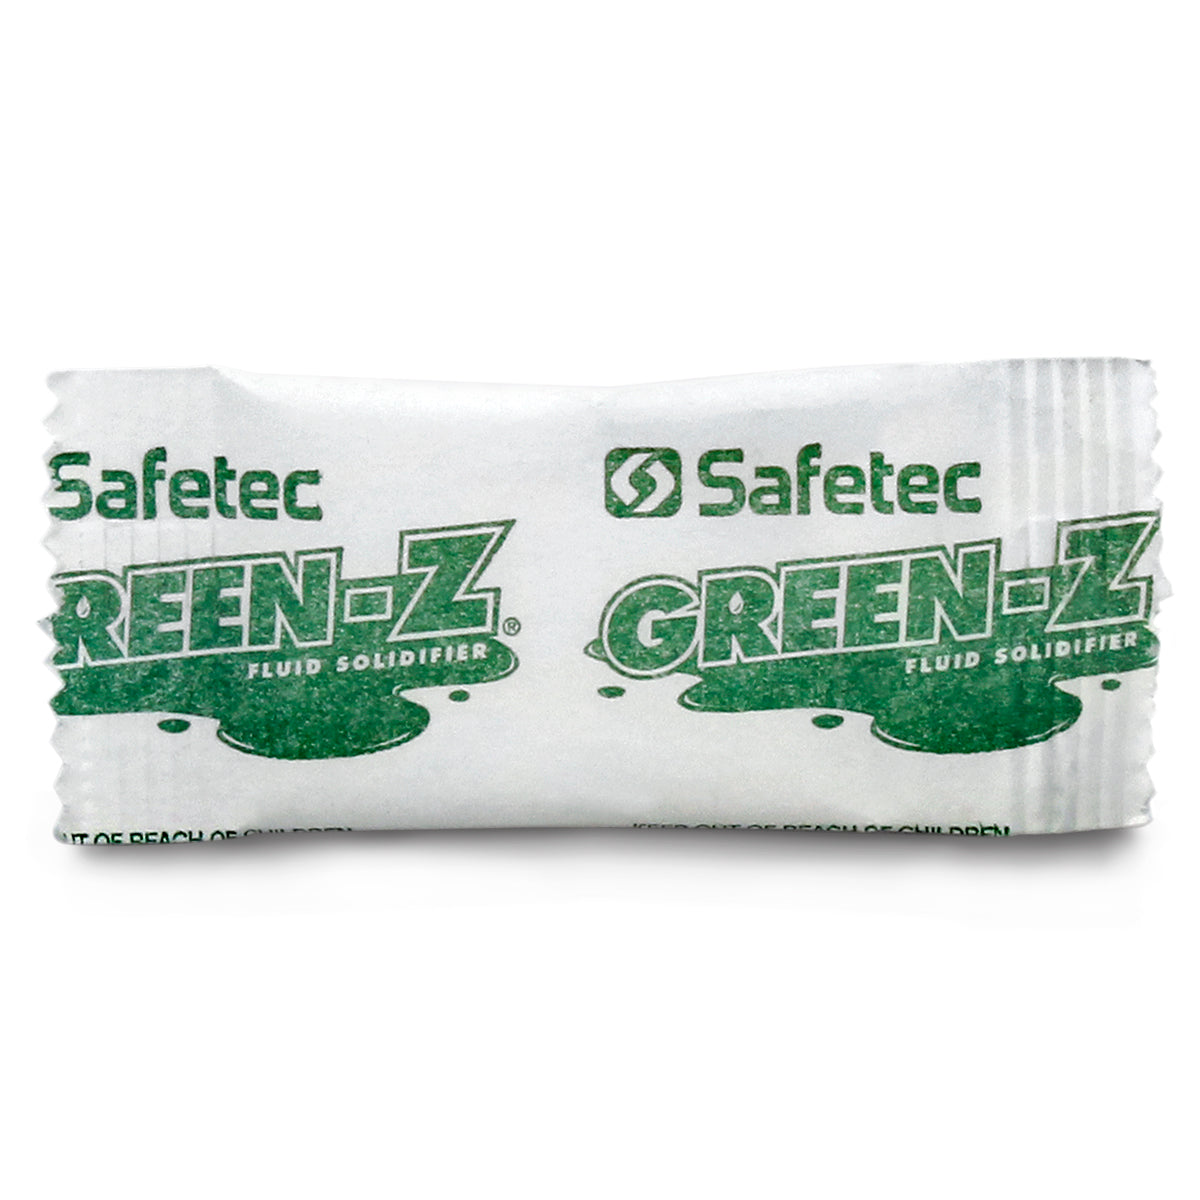 SafeTec - Green-Z® Spill Control Solidifier Zafety Pacs - 4g data-zoom=